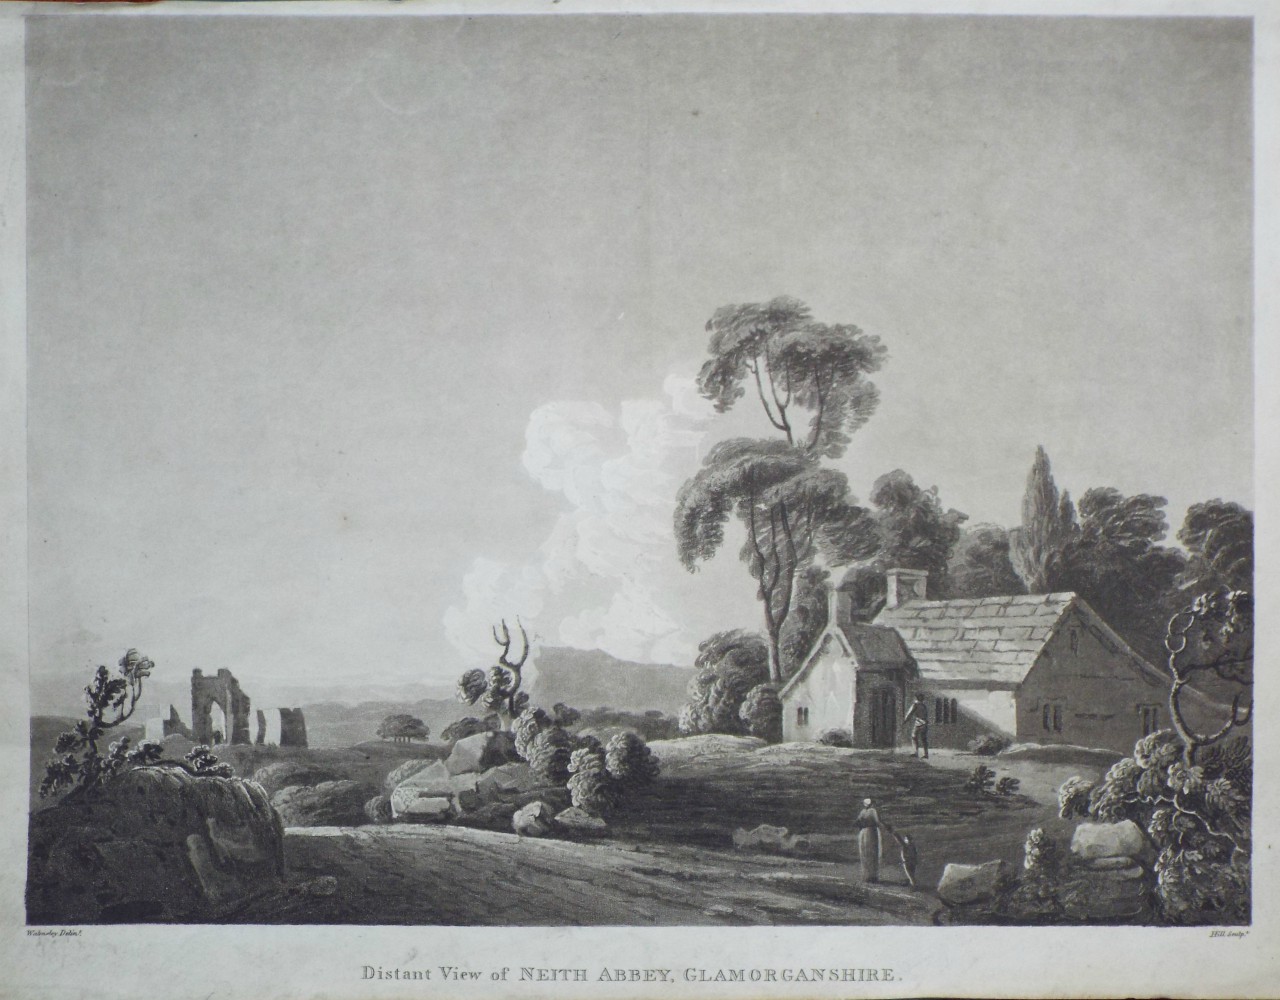 Aquatint - Distant View of Neith Abbey, Glamorganshire. - 